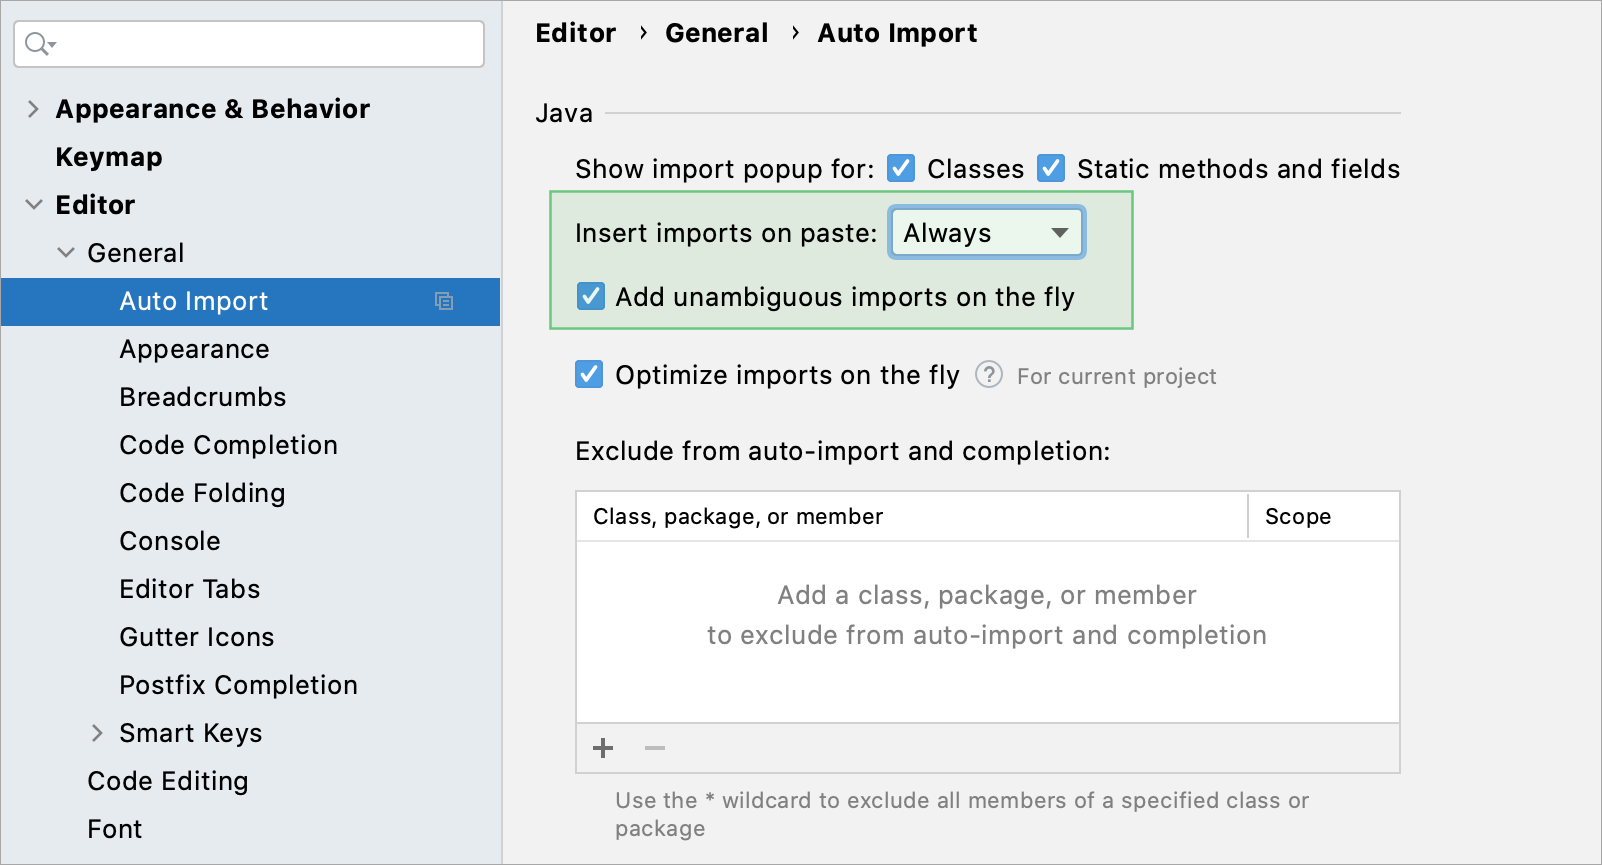 Add unambiguous imports on the fly checkbox